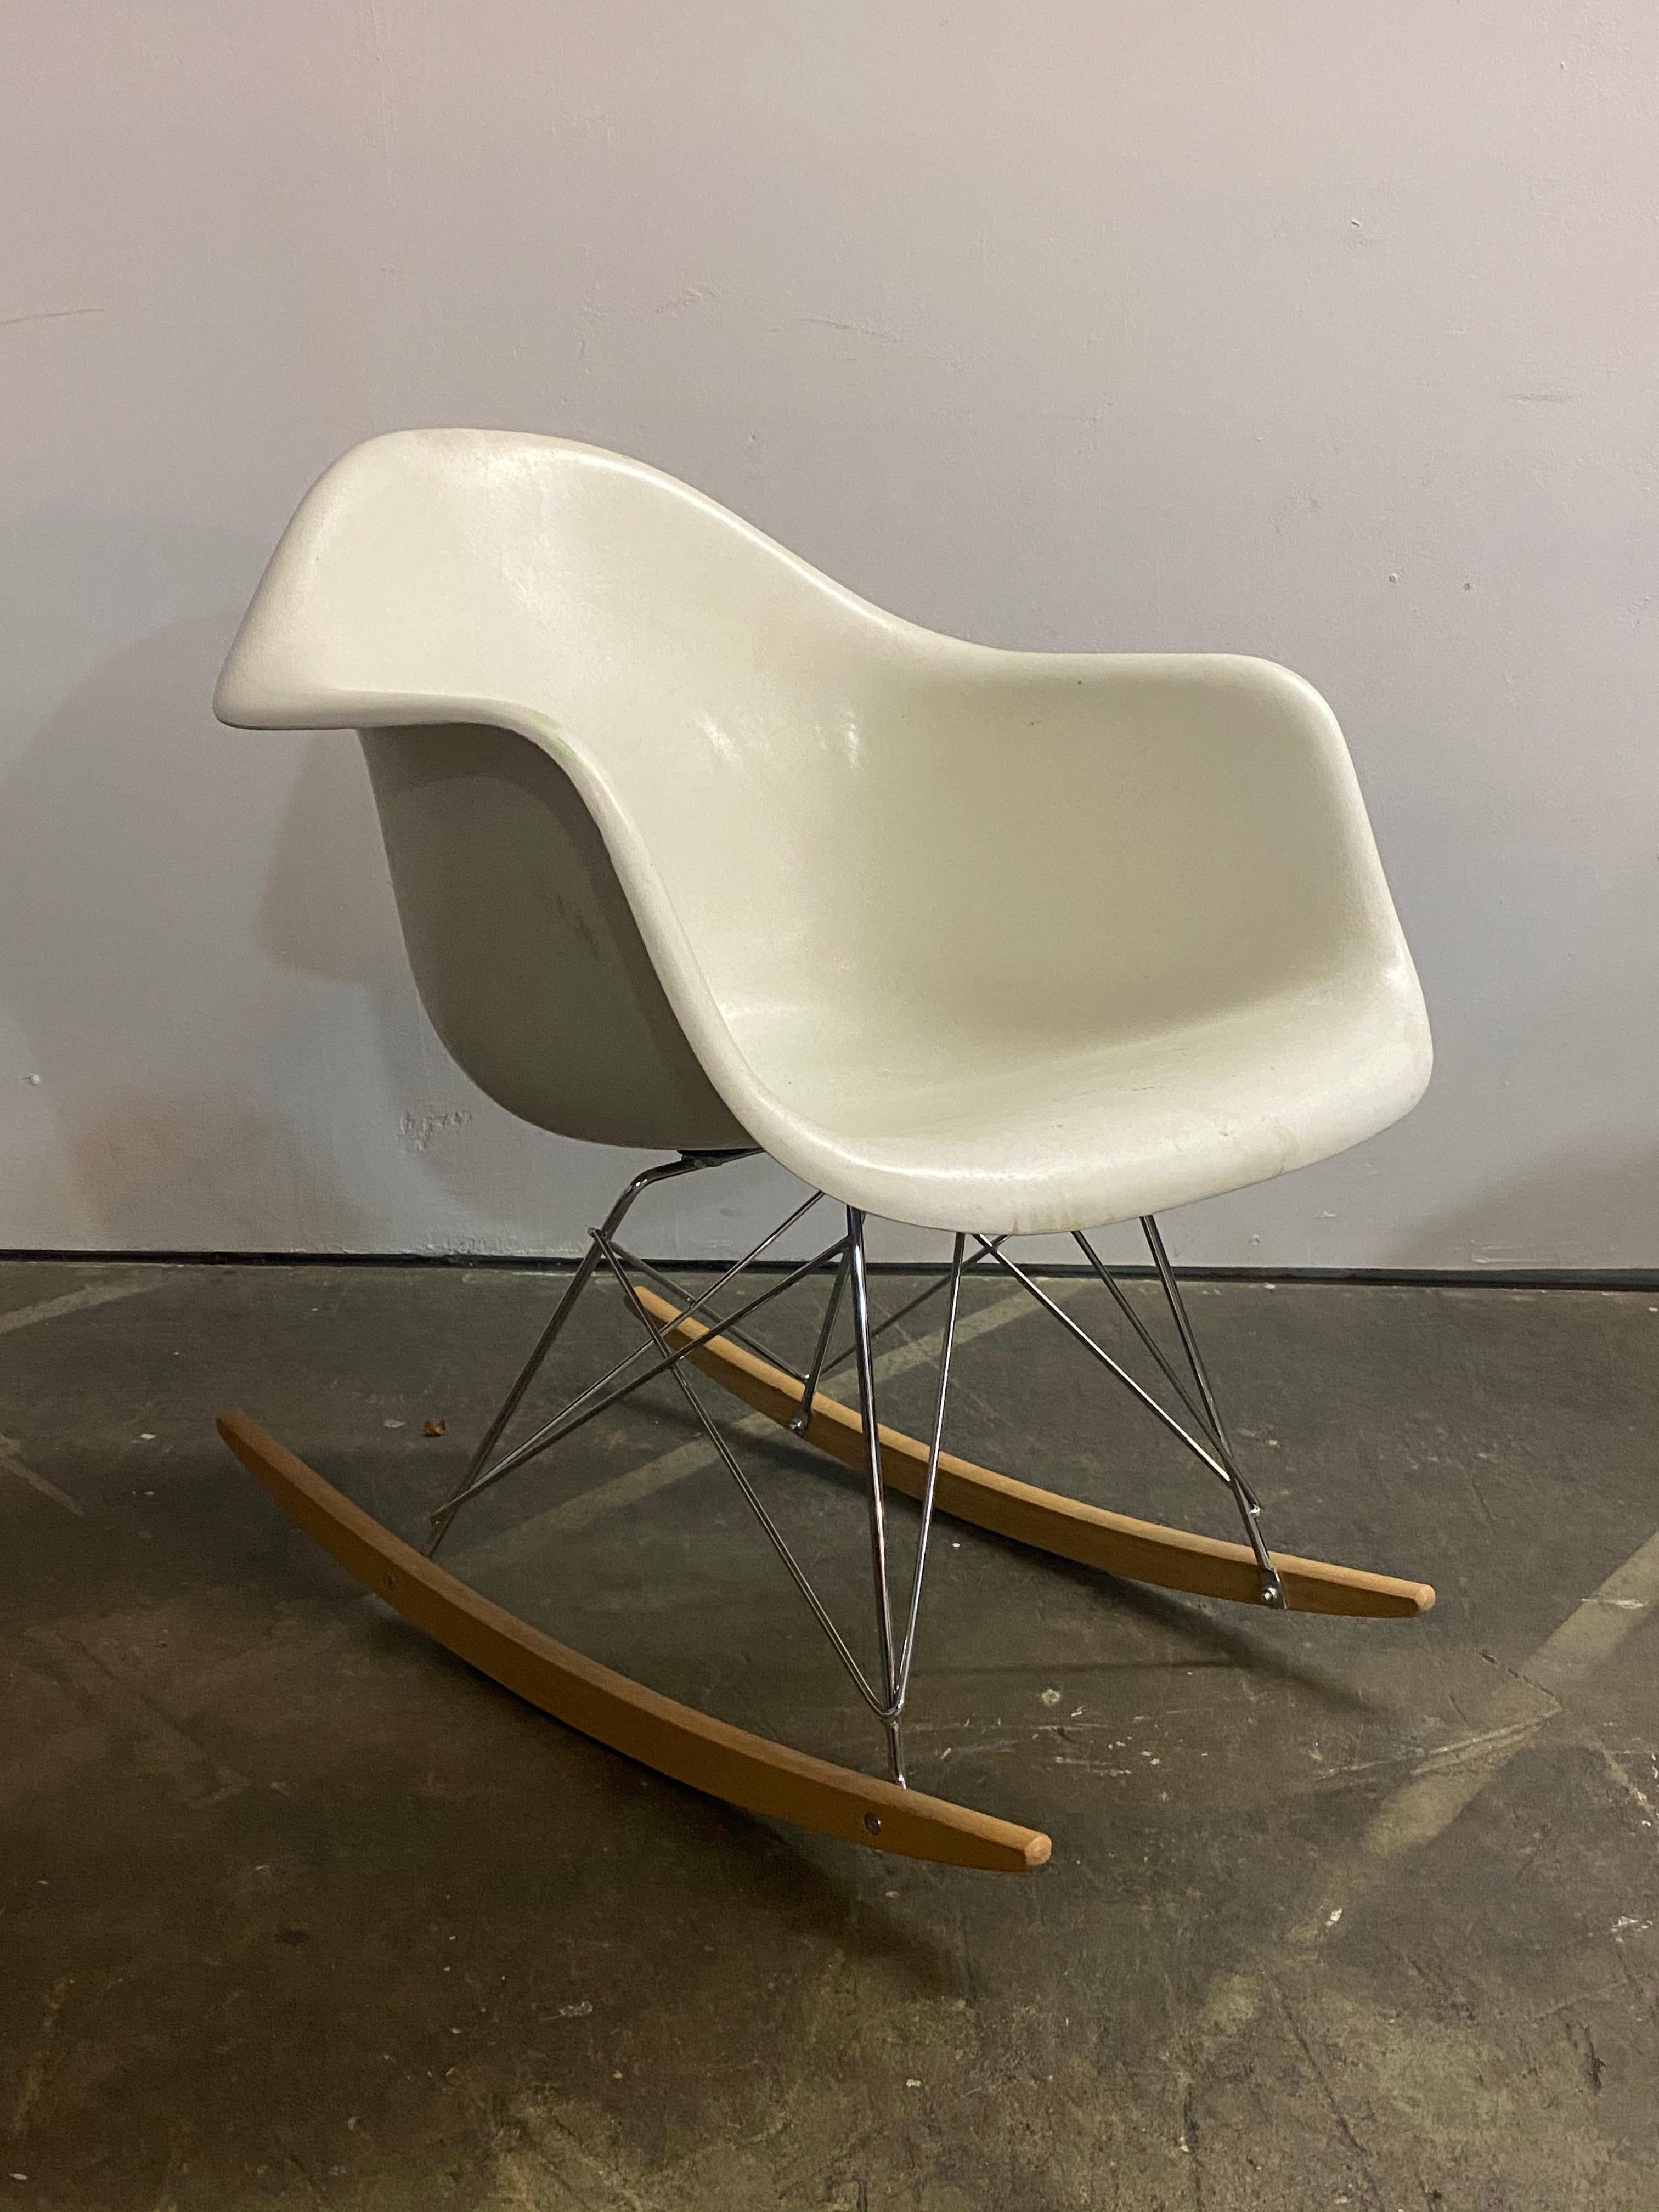 White Herman Miller Eames RAR rocking chair. Shell in good shape with no cracks. It was originally upholstered and the vinyl covering and foam were removed. Sturdy fiberglass shell structurally sound with elegant lines. The factory threaded inserts